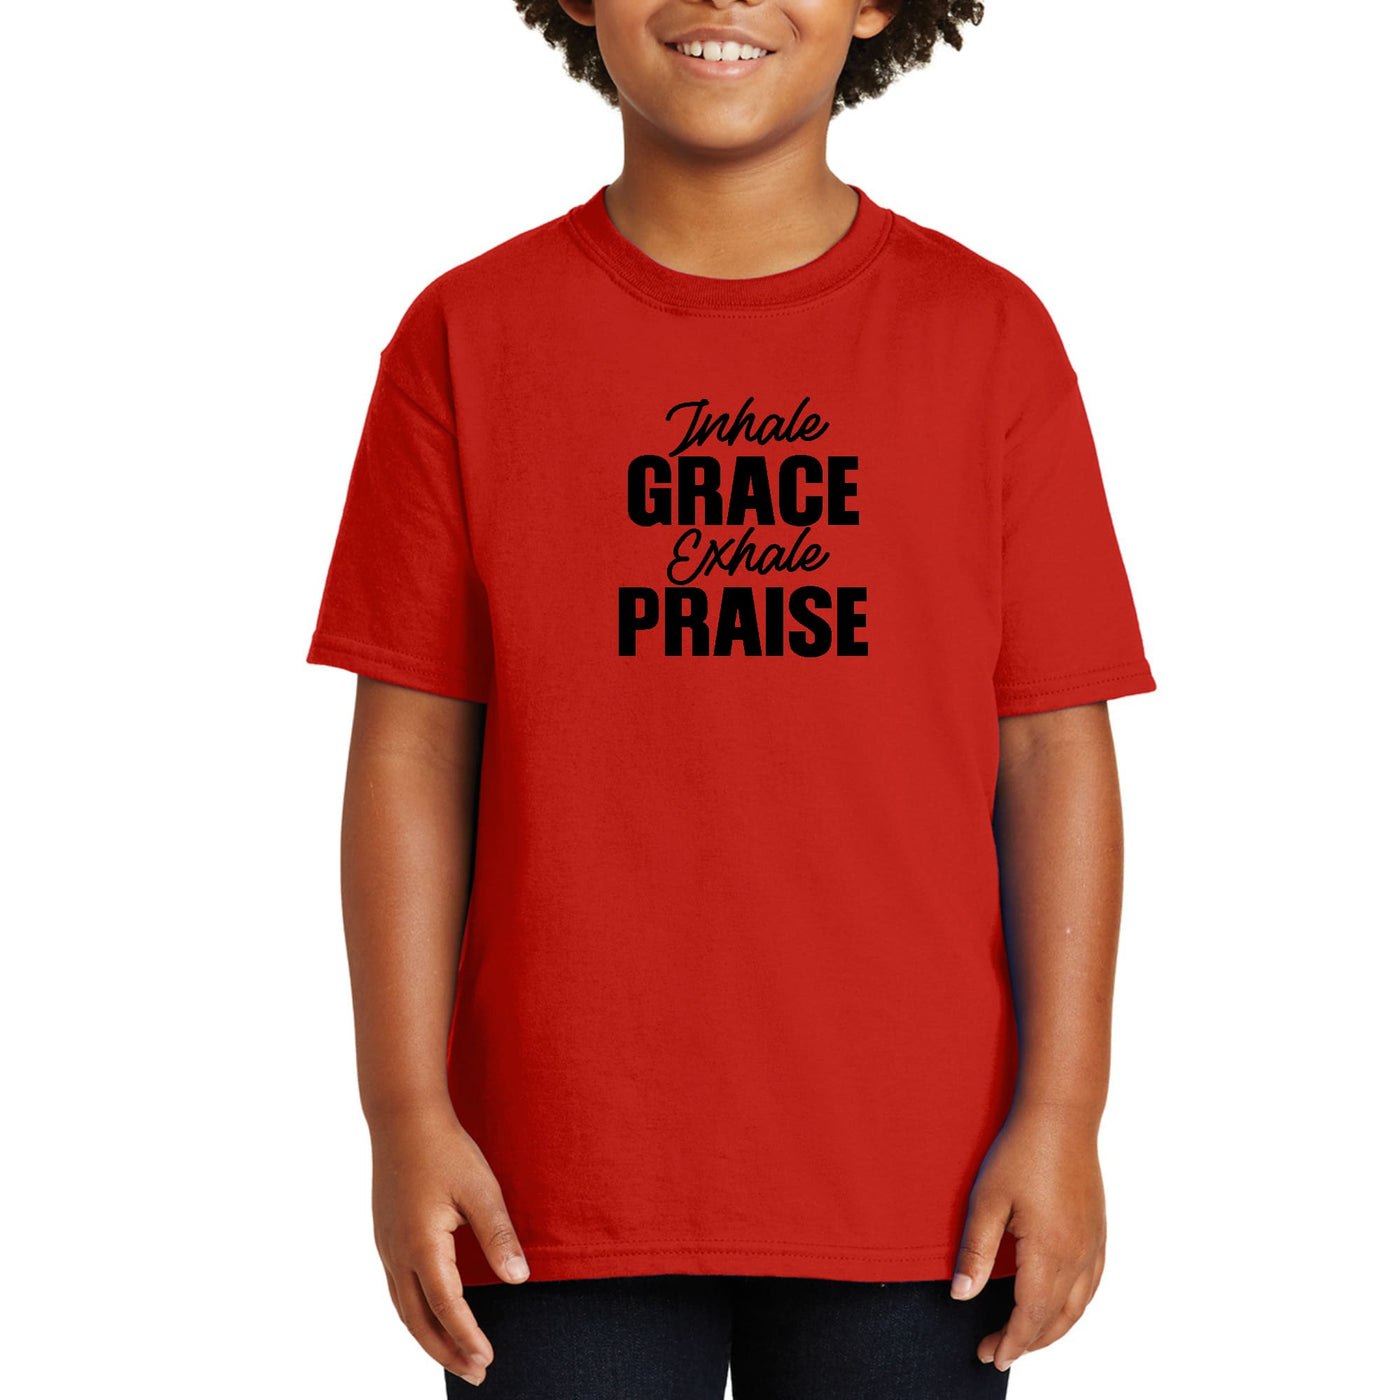 Youth Short Sleeve Graphic T-shirt Inhale Grace Exhale Praise Black - Youth